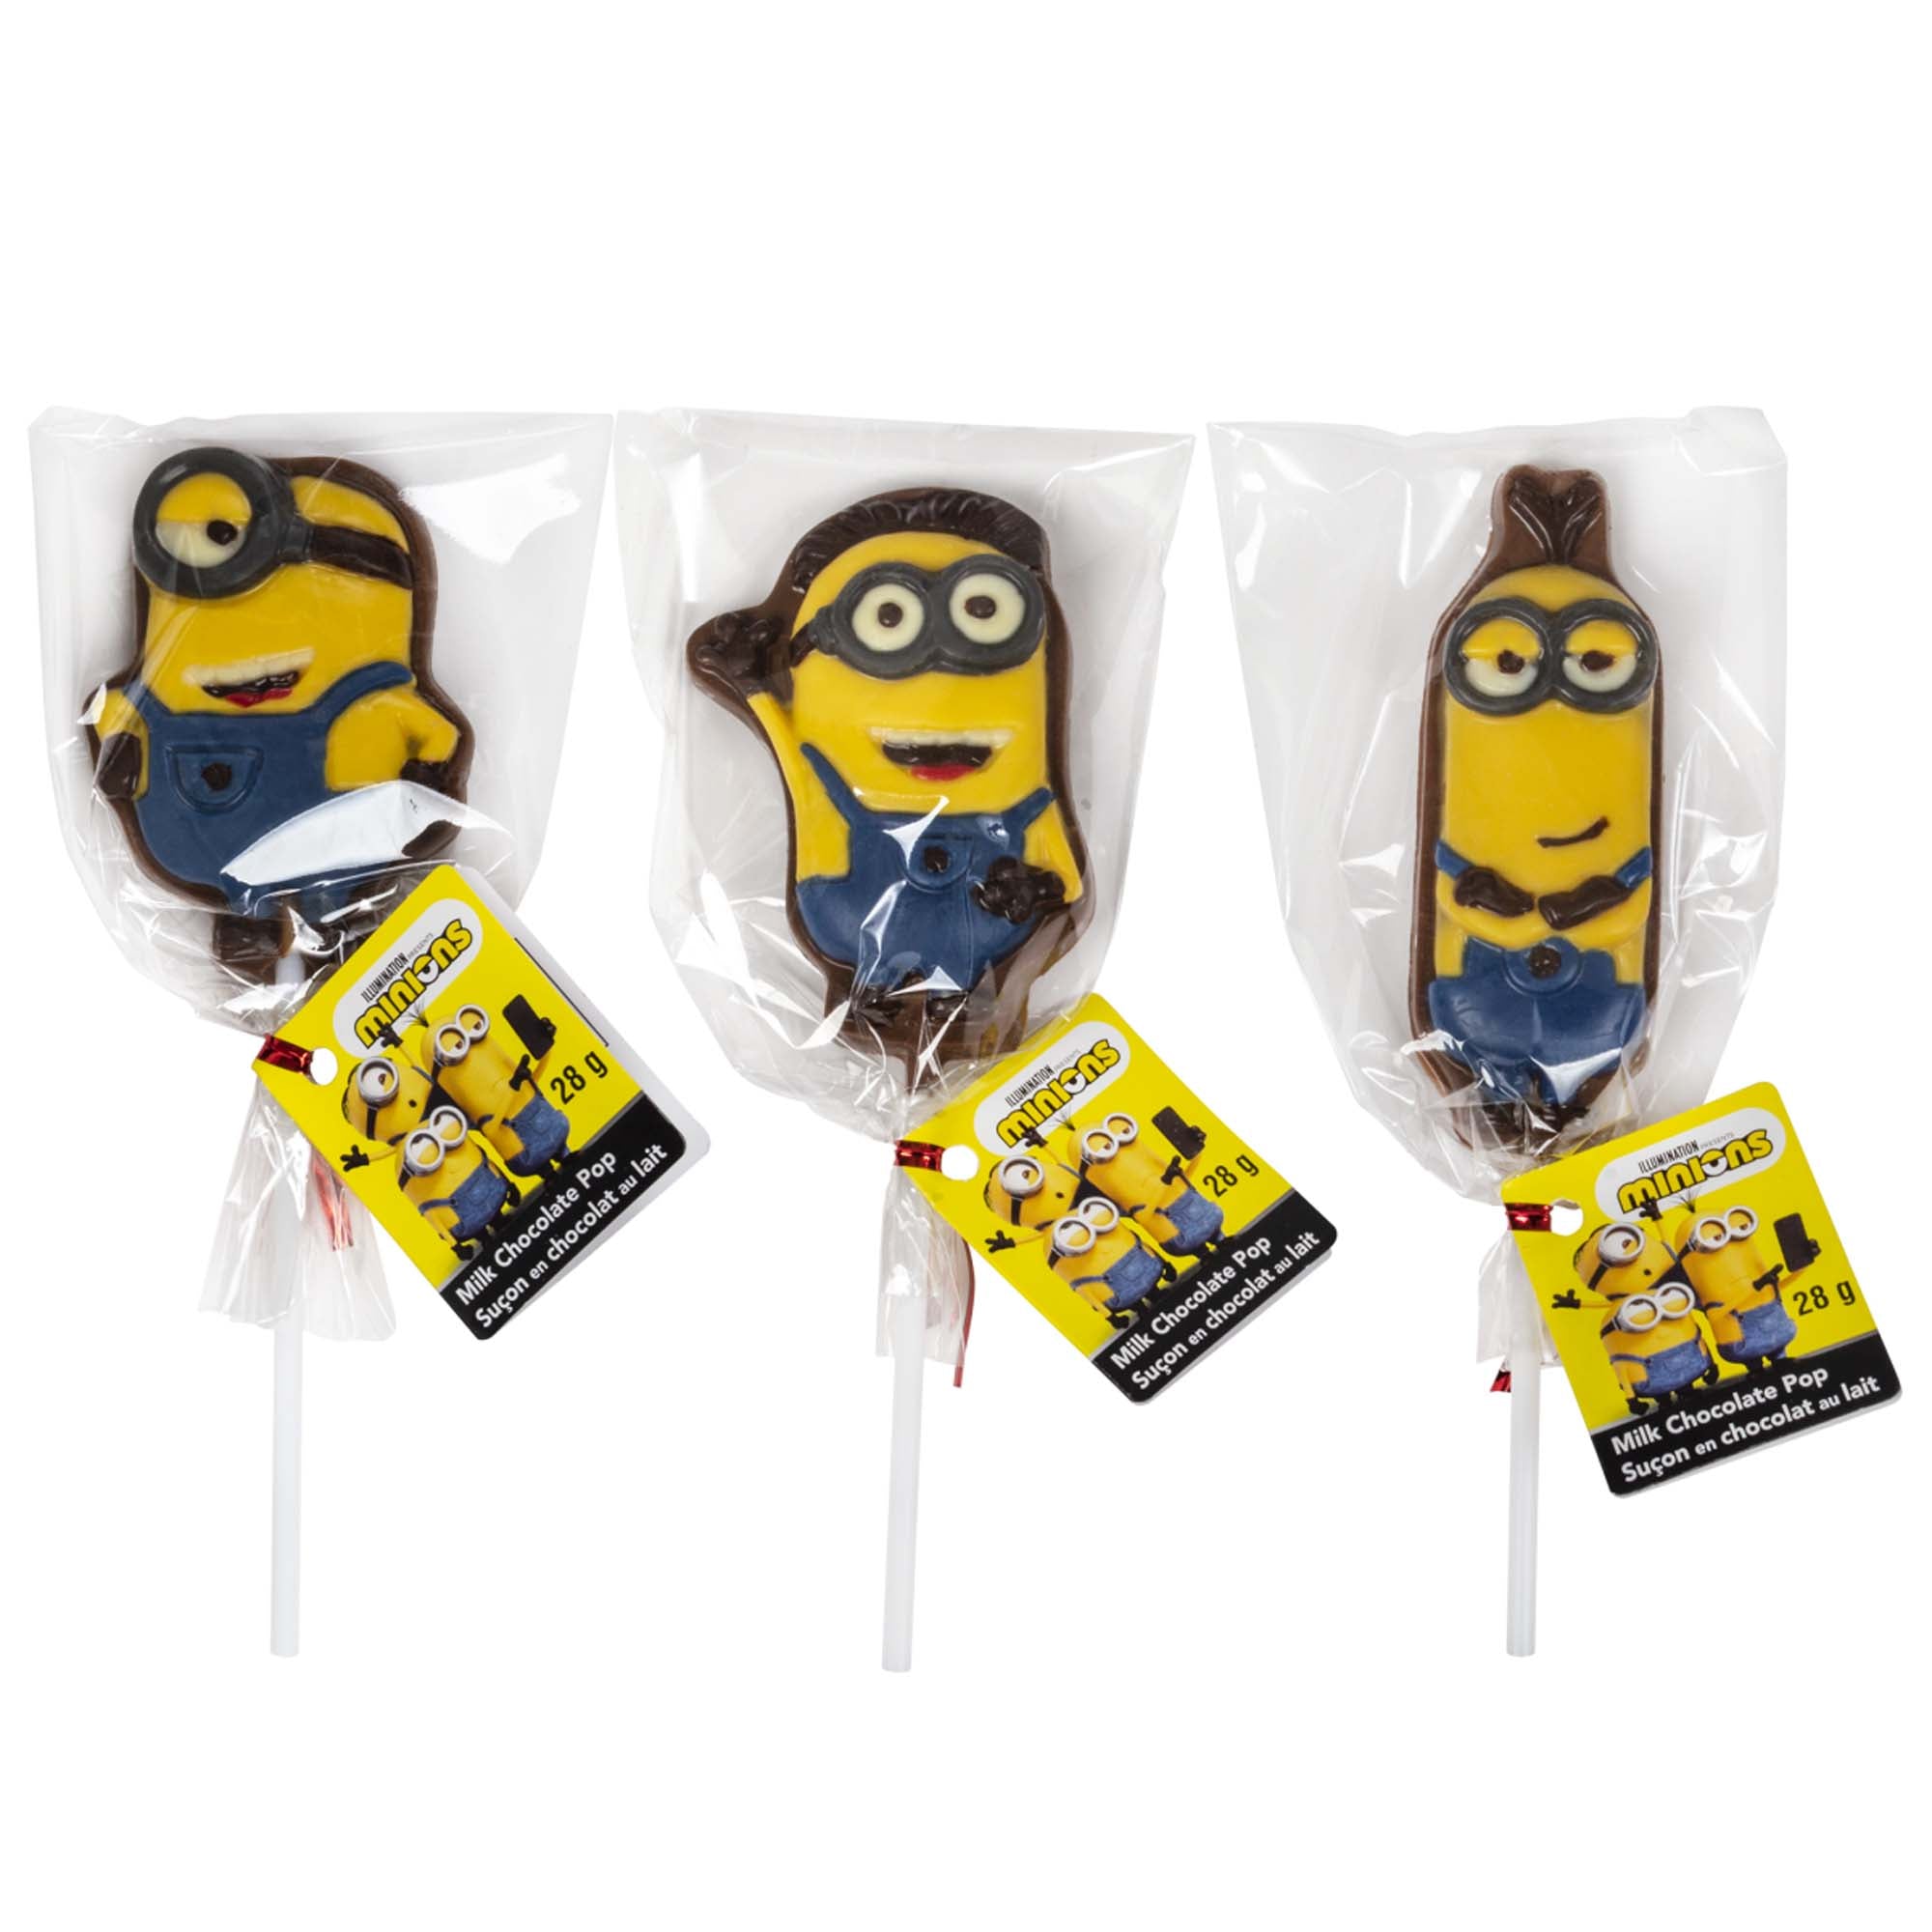 Minions Chocolate Pops, 28g, Assortment, 1 Count